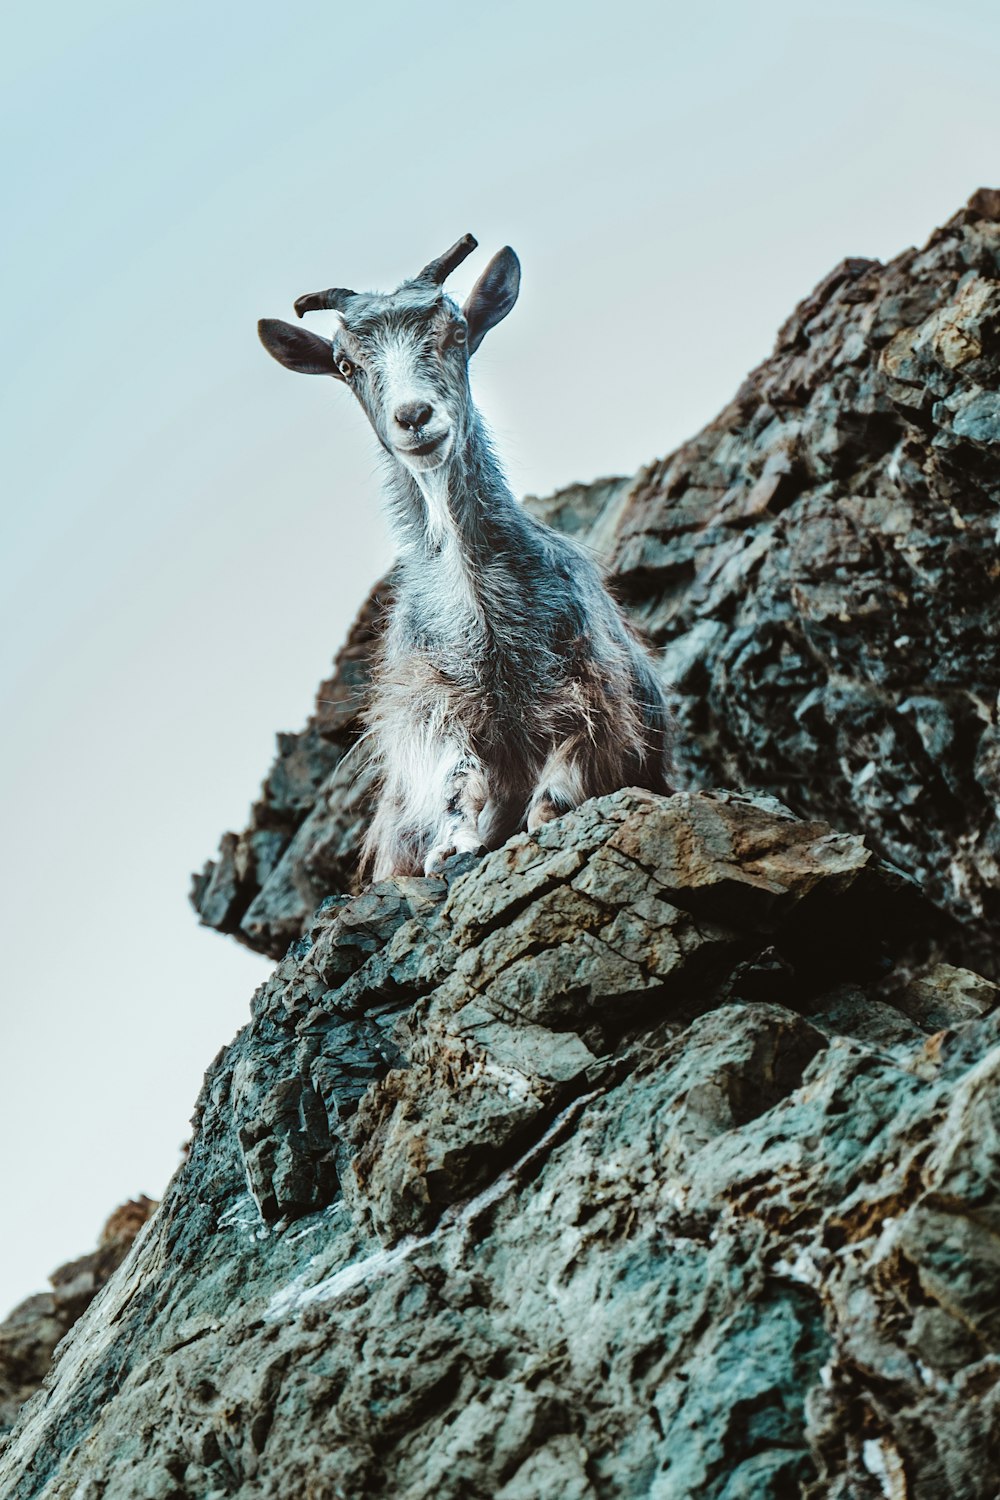 white and gray goat on rock formation at daytime